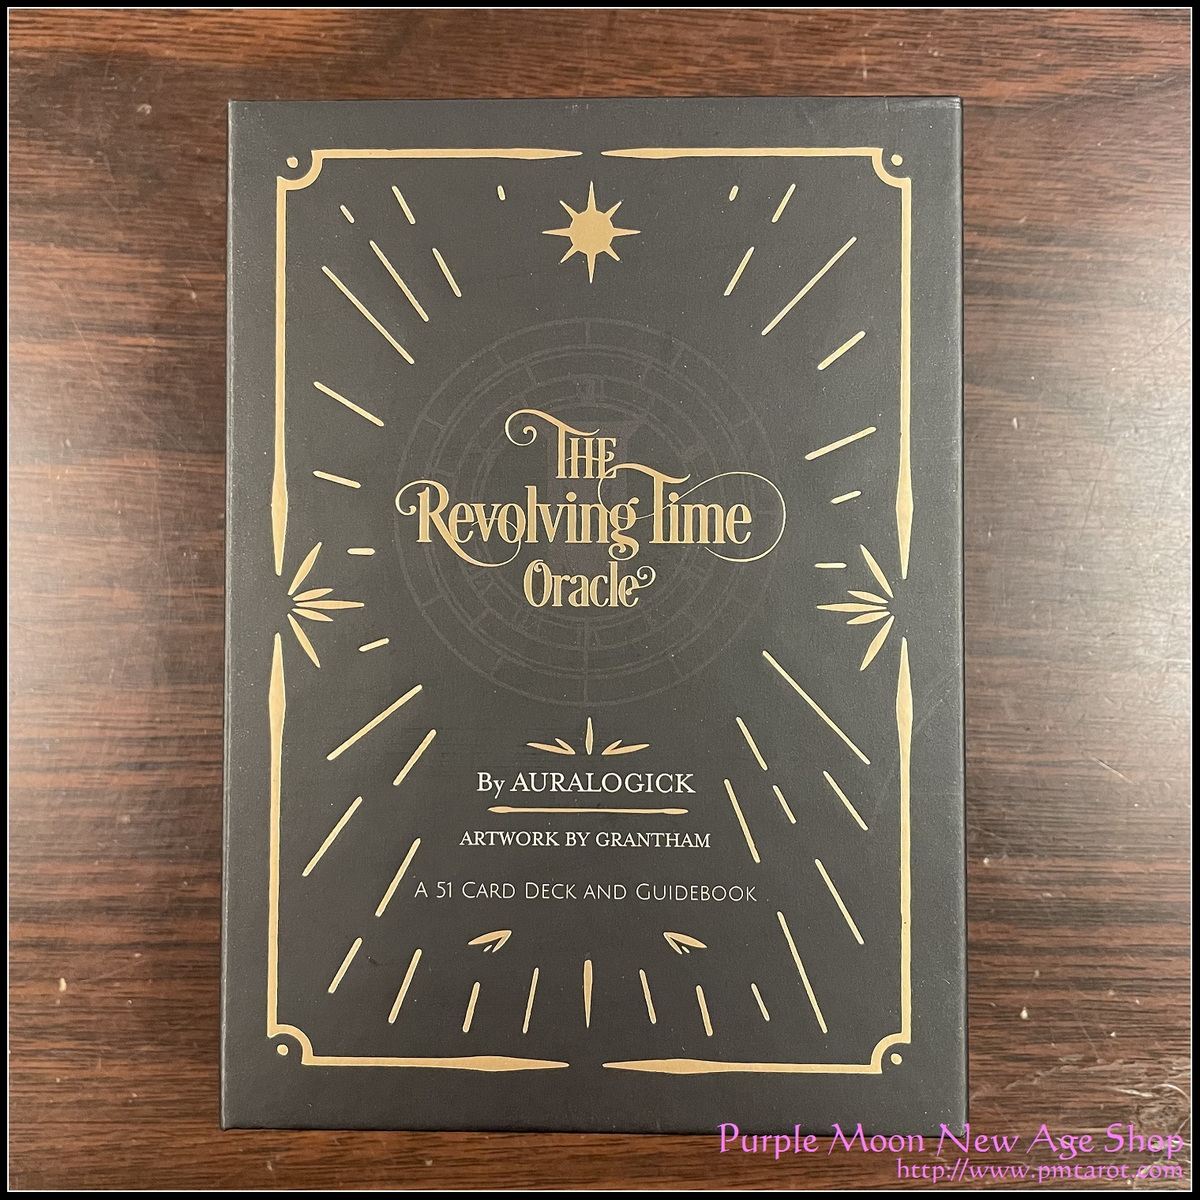 The Revolving Time Oracle